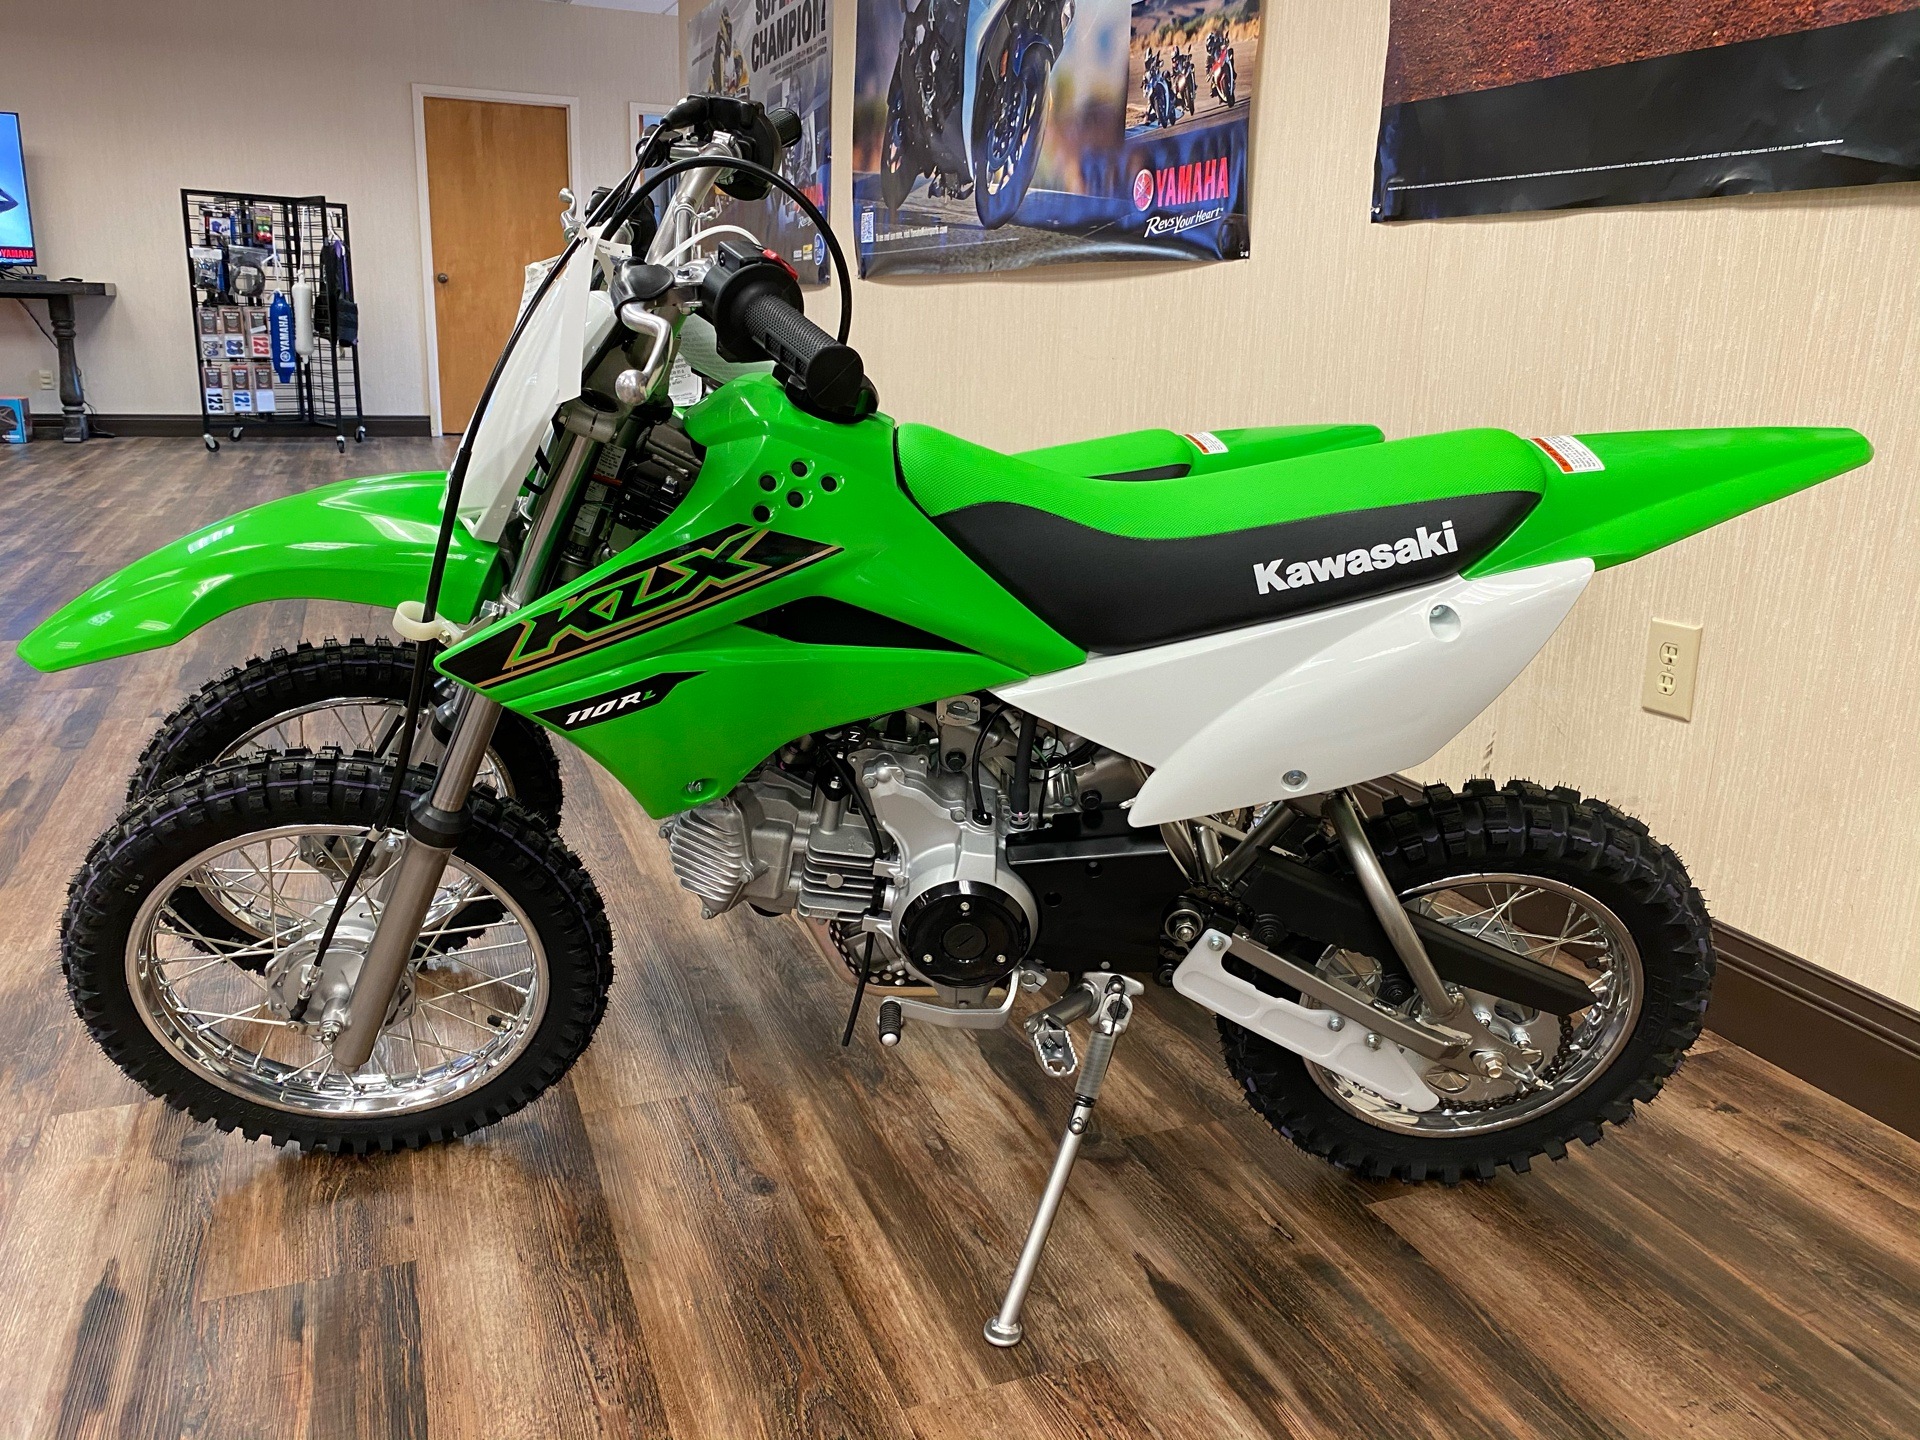 New 2021 Kawasaki KLX 110R L Motorcycles Statesville, NC | Stock AD7378 - greatwesternmotorcycles.com